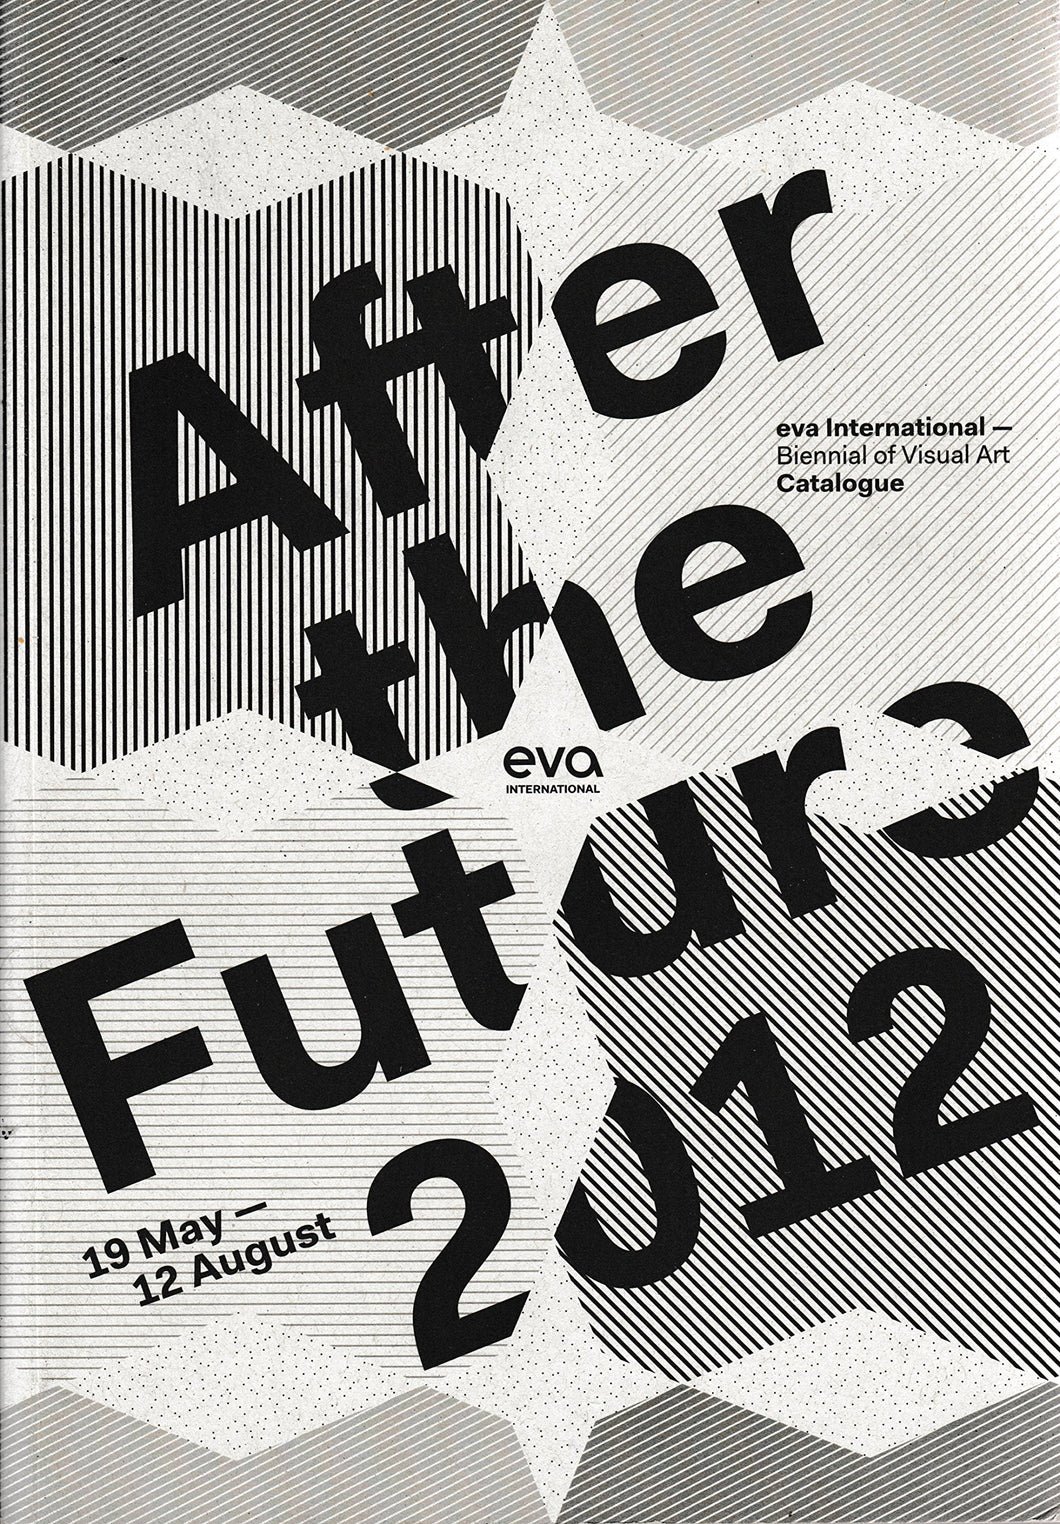 Eva International - After the Future, Biennial of Visual Art, Limerick City, Ireland, 19 May - 12 August 2012, Curated by Annie Fletcher